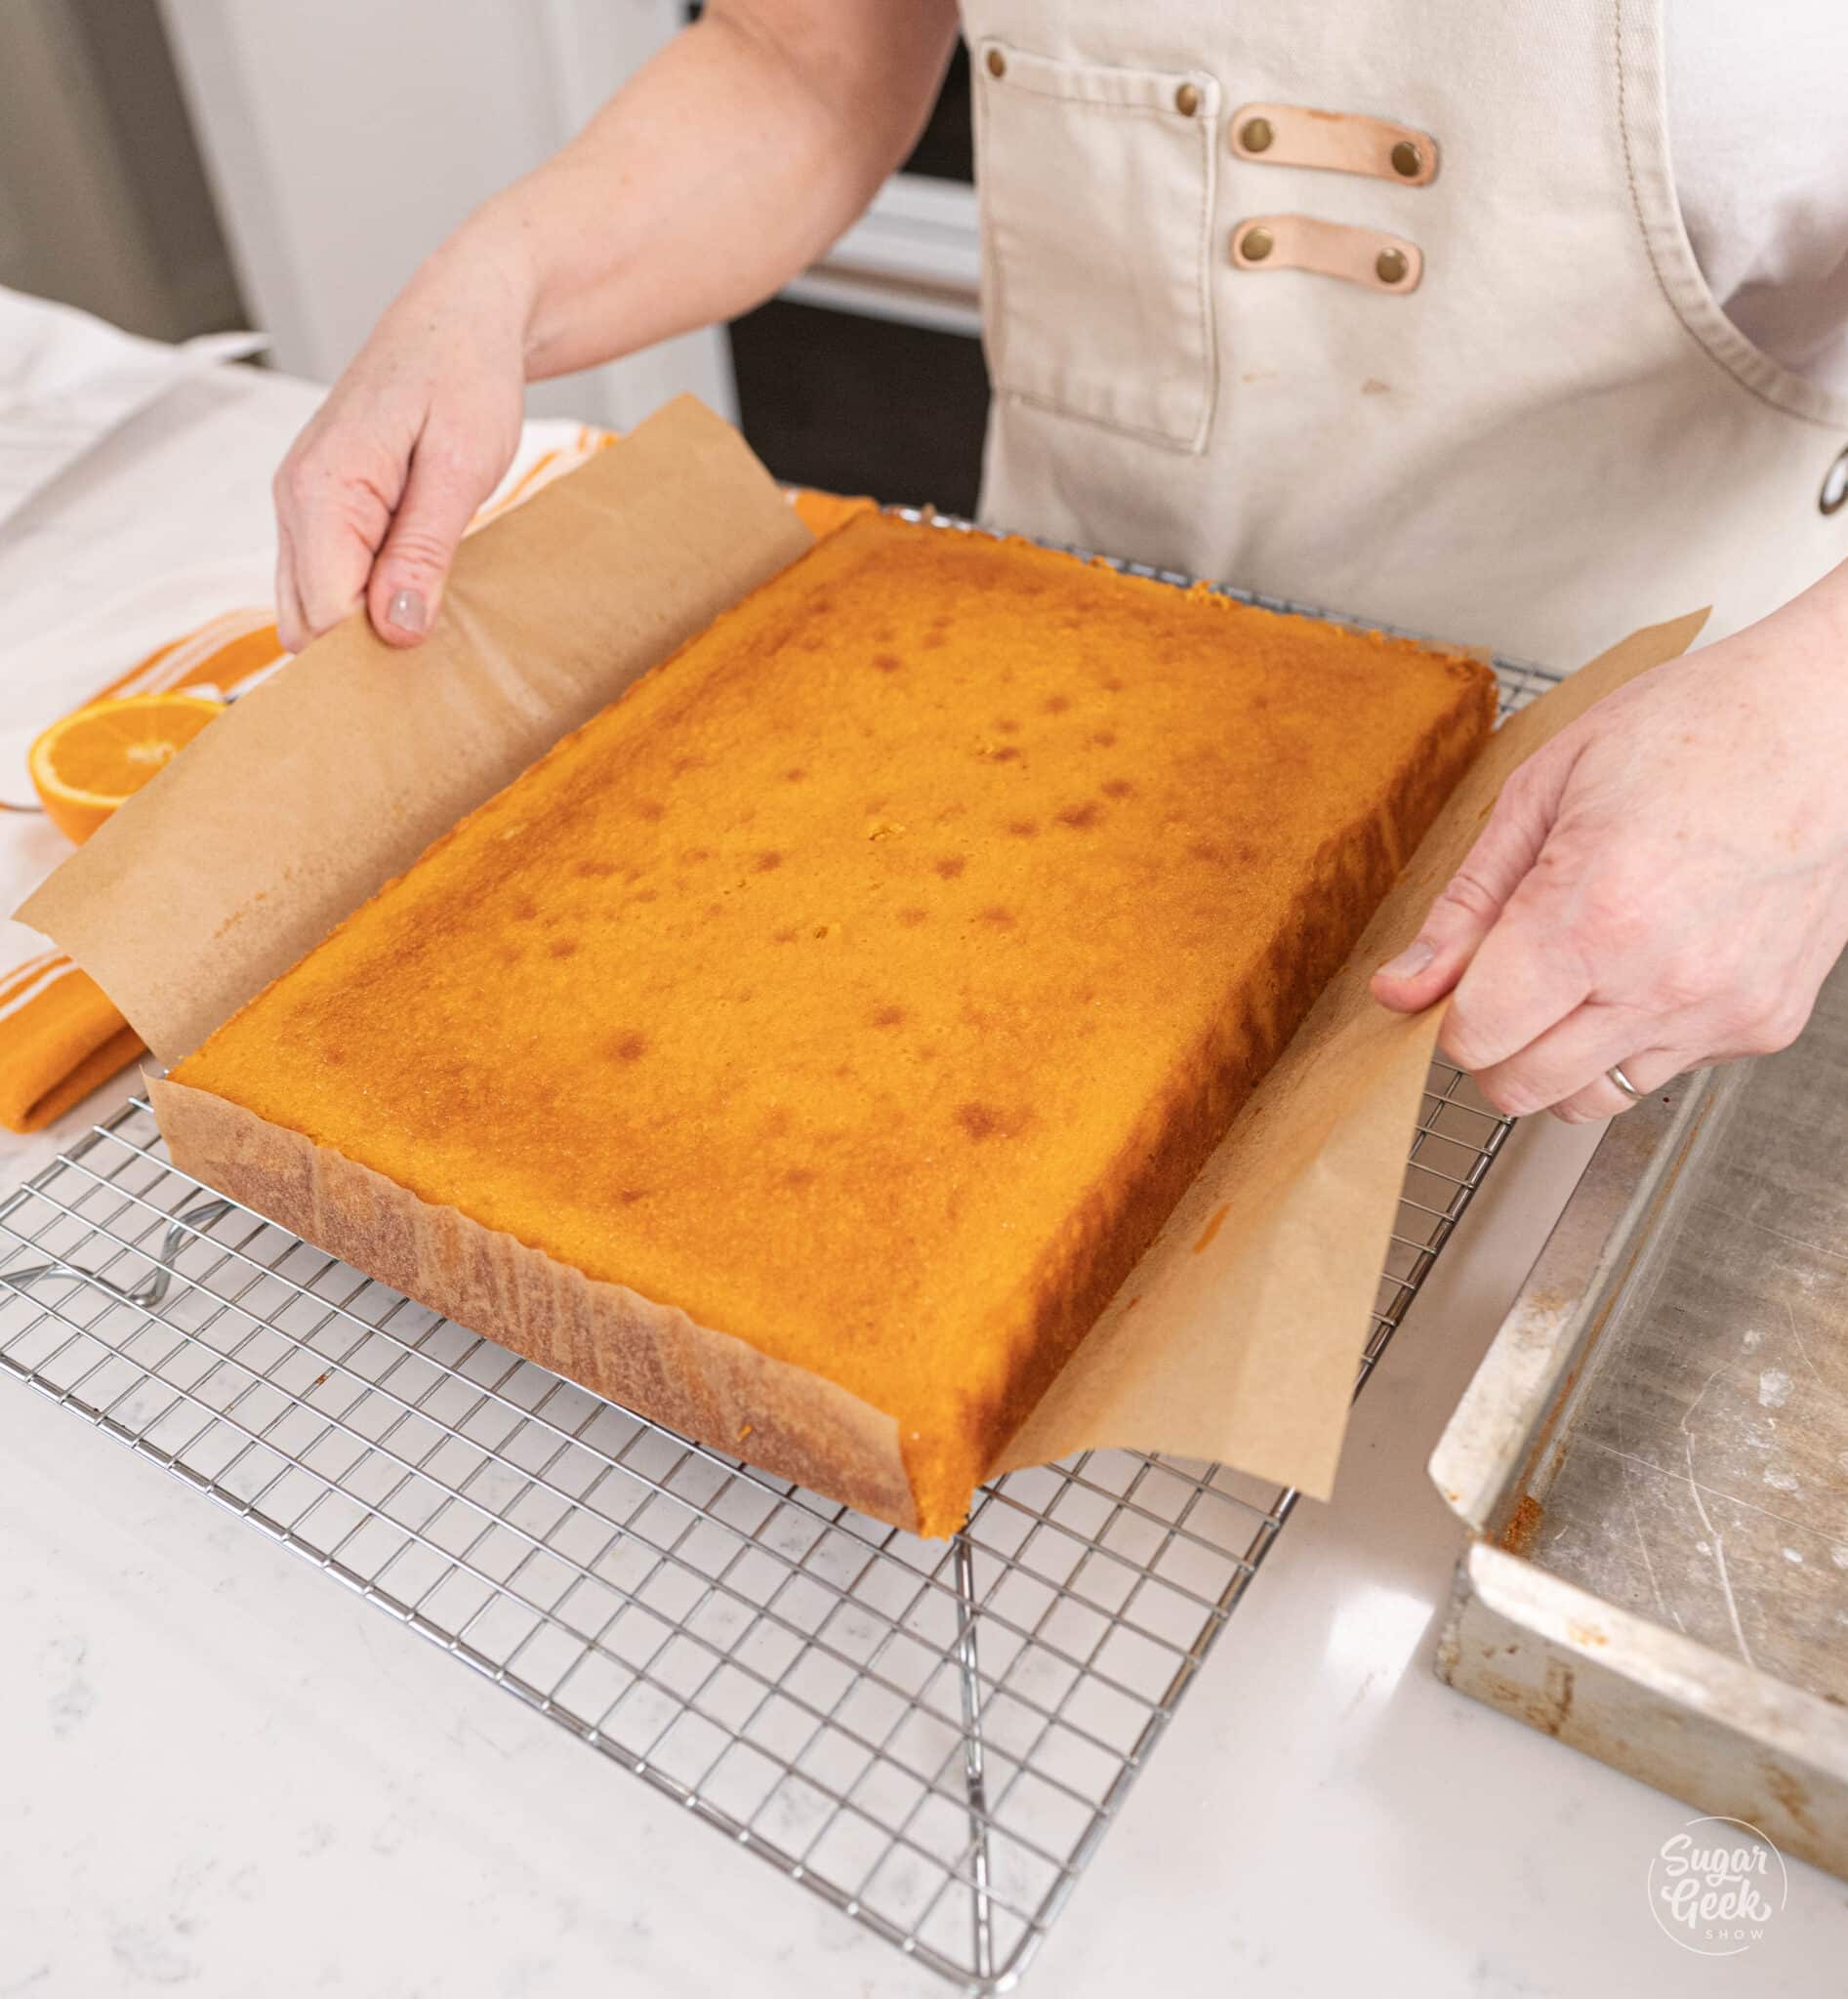 placing a cake on a cooling rack